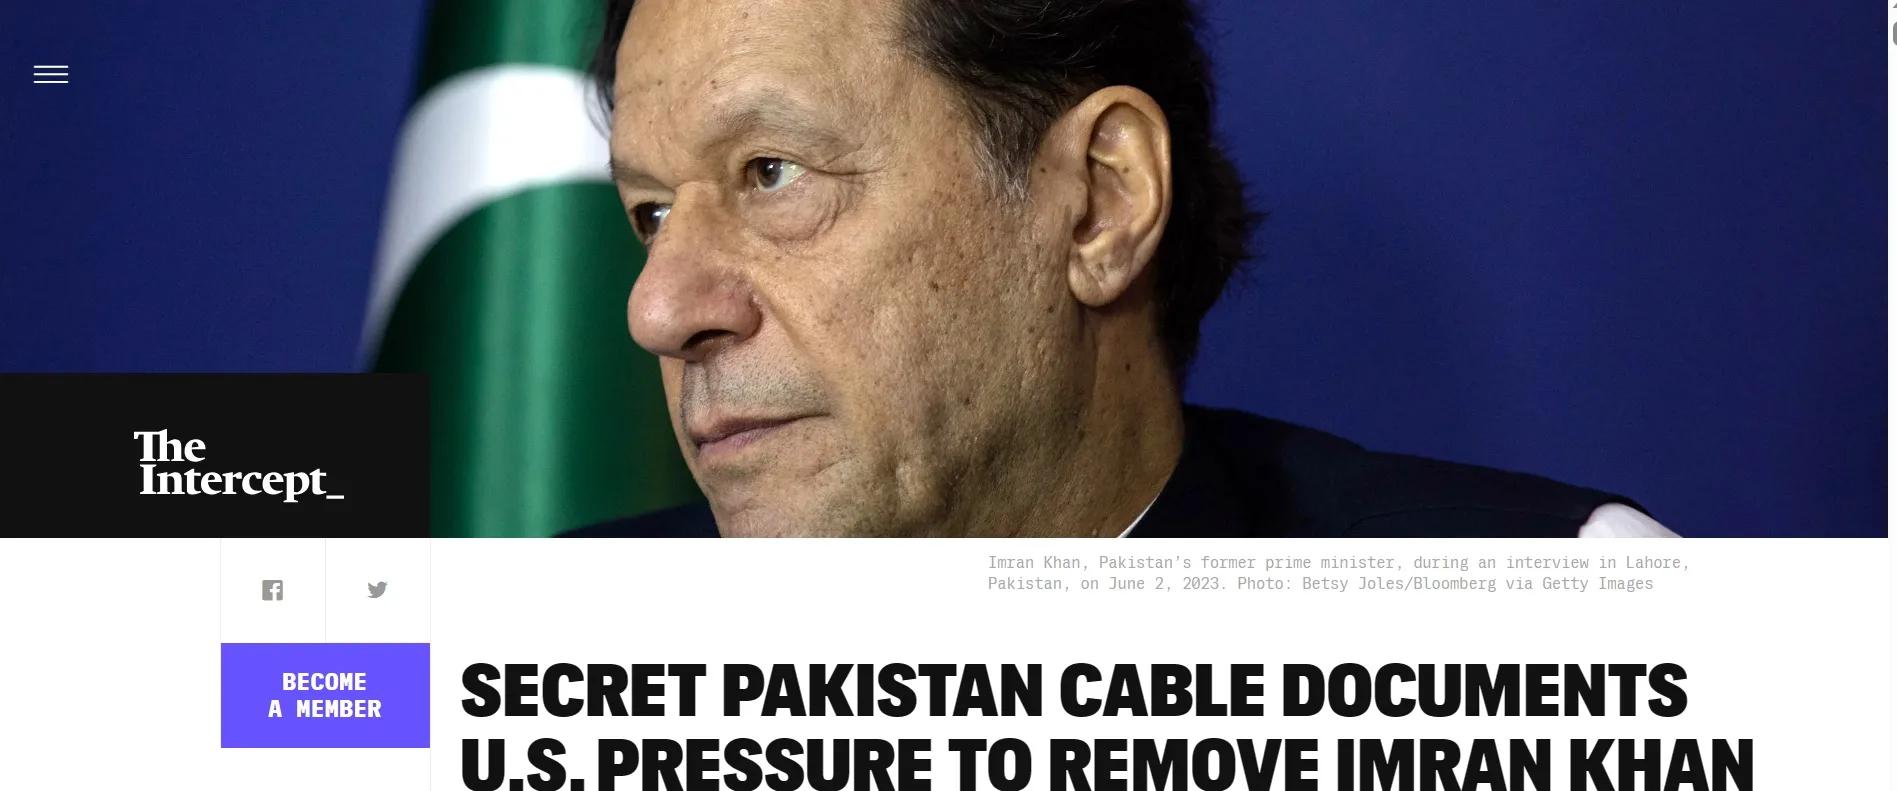 The Story Behind Secrete Pakistan Cable Documents U.S Pressure to Remove Imran Khan [Video]